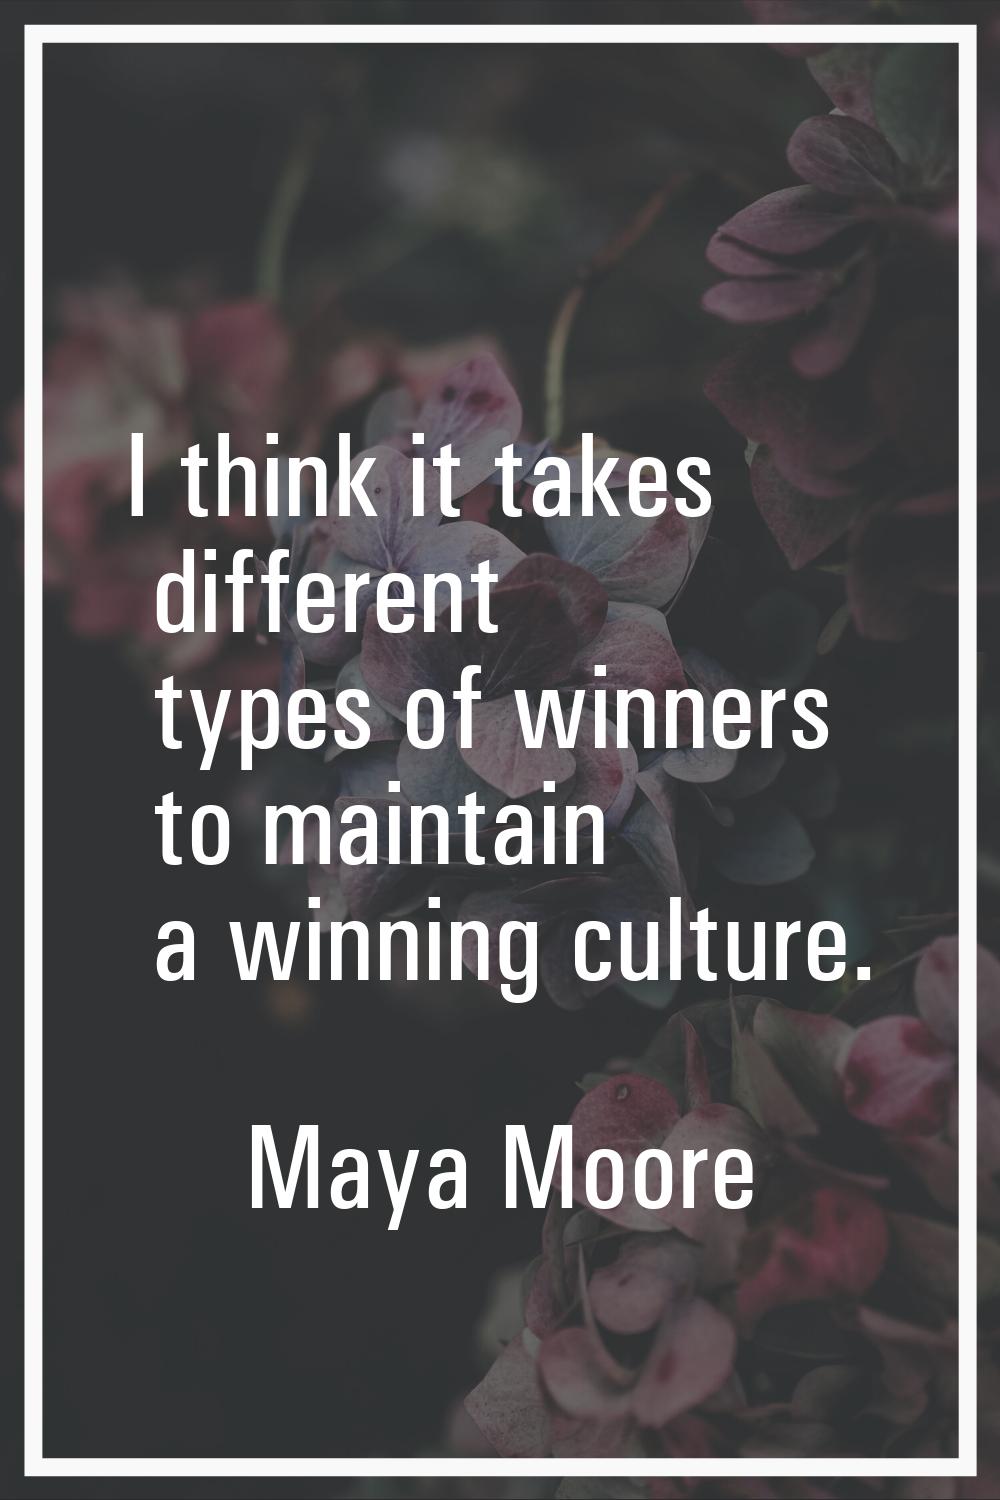 I think it takes different types of winners to maintain a winning culture.